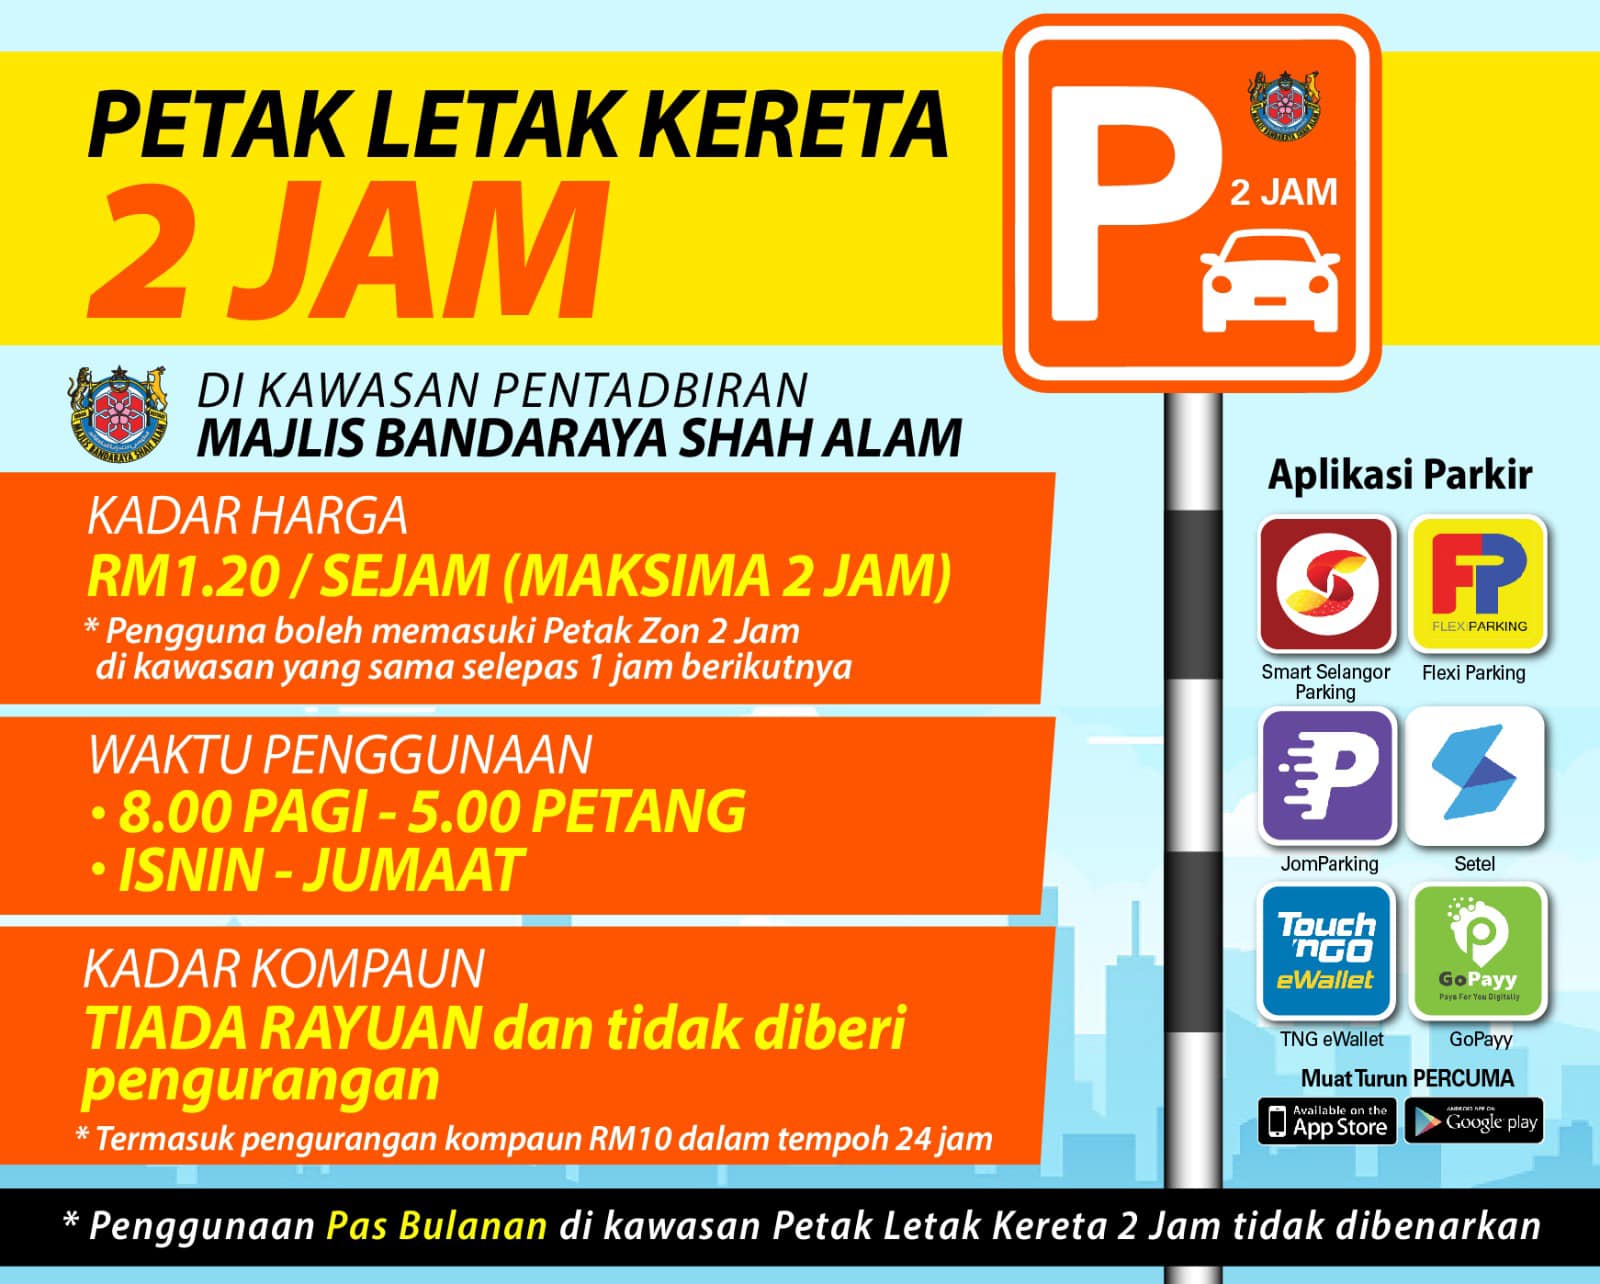 MBSA 2-hour parking system starts on July 1 - 8am to 5pm weekdays, RM1 ...